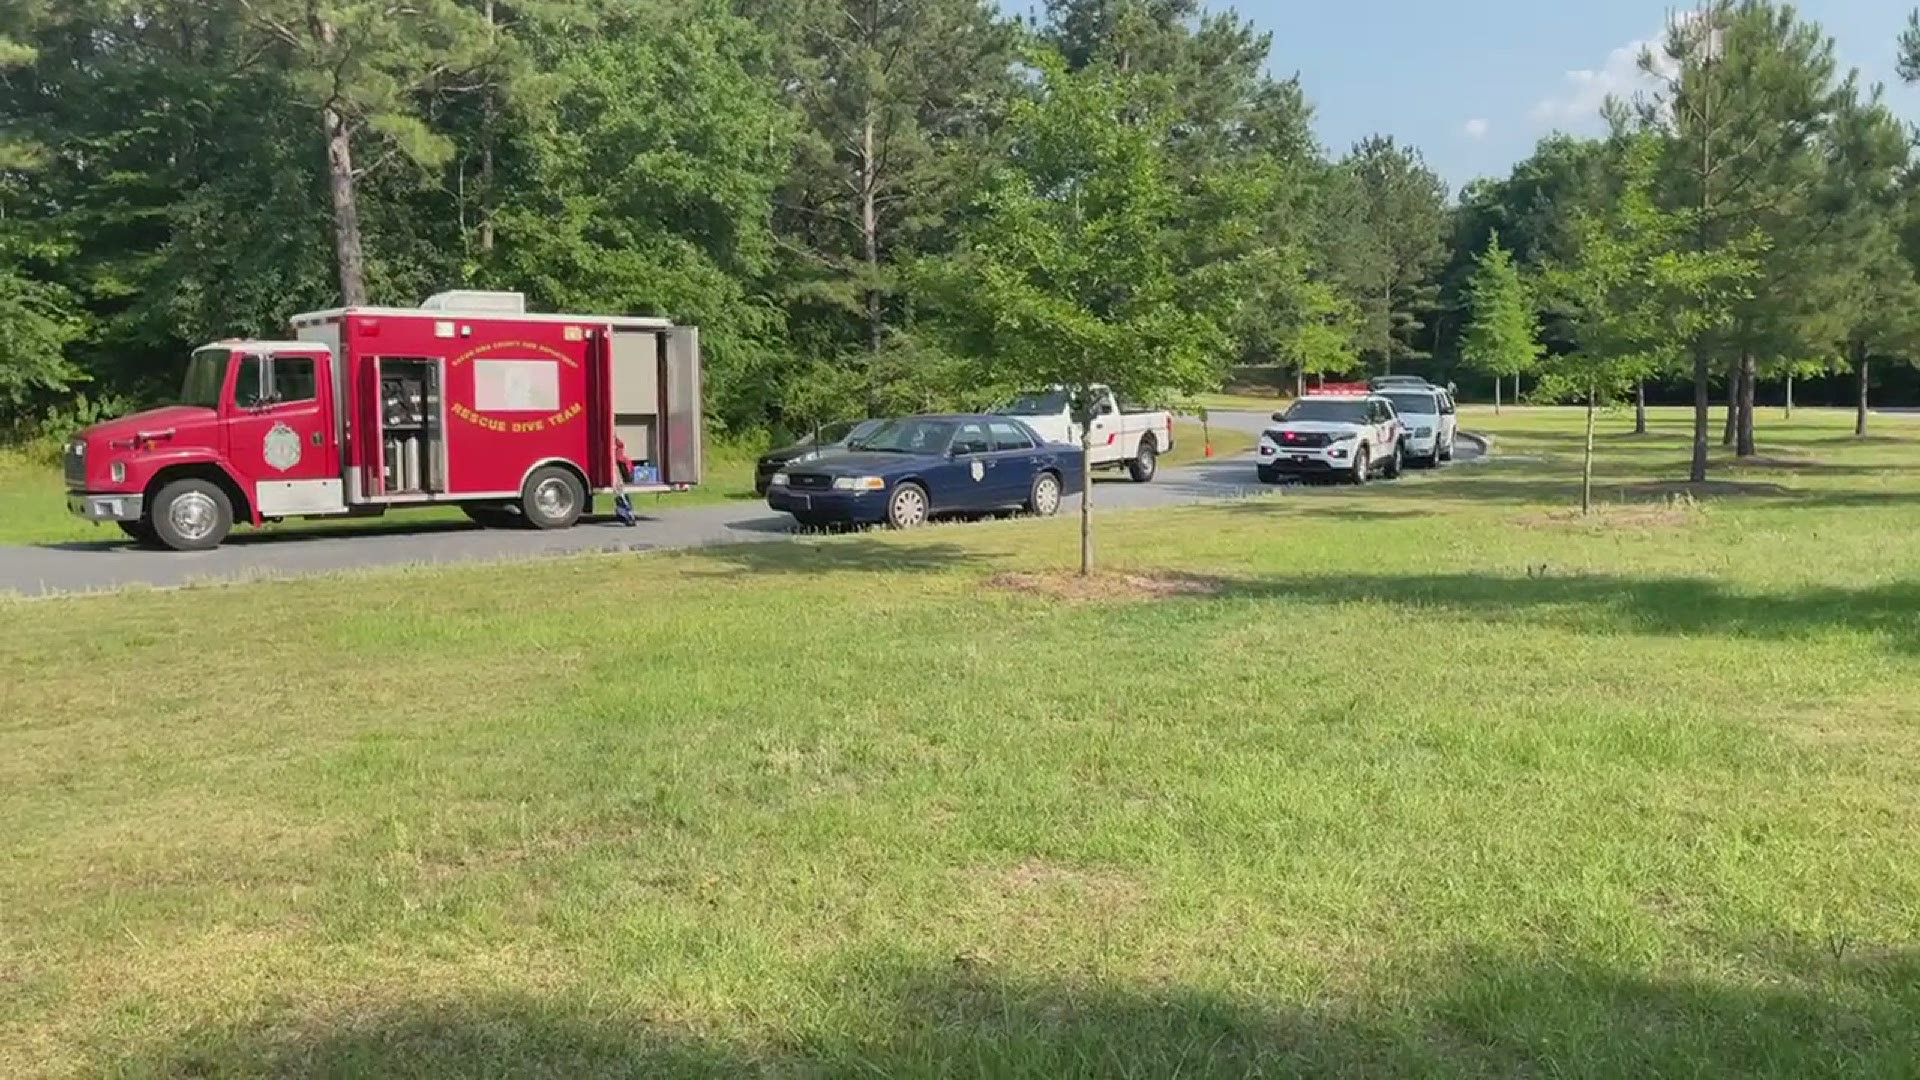 Crews searching for 18-year-old in possible drowning at Amerson River Park
Credit: Ashlyn Webb